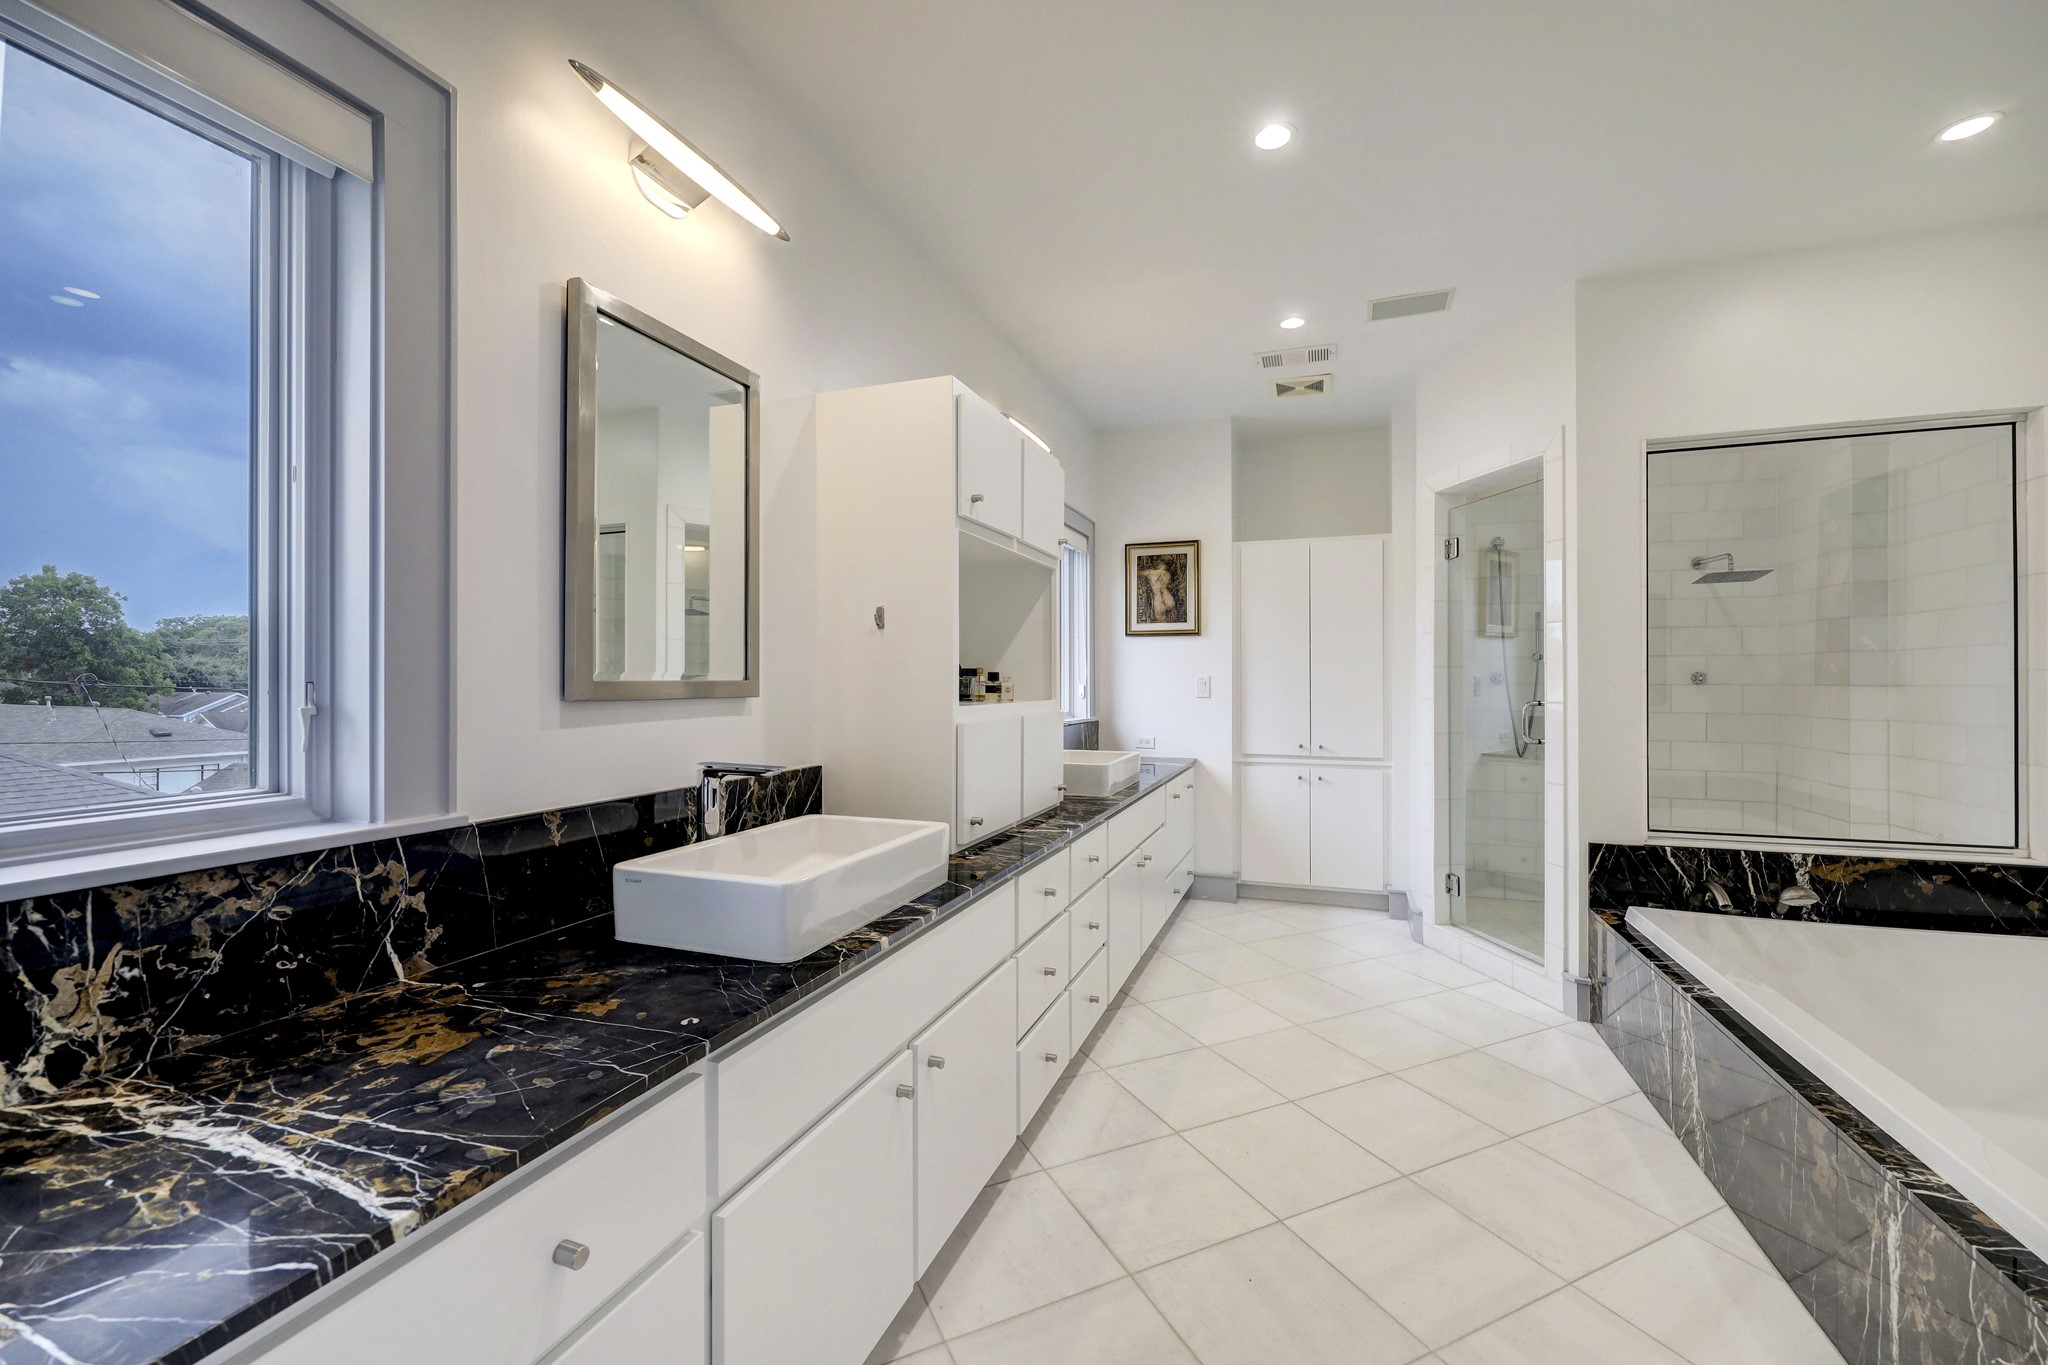 Treat yourself to the spa-like primary bathroom with marble counters, large walk-in marble shower and spacious soaking tub! The primary suite also enjoys a large walk-in closet. 

